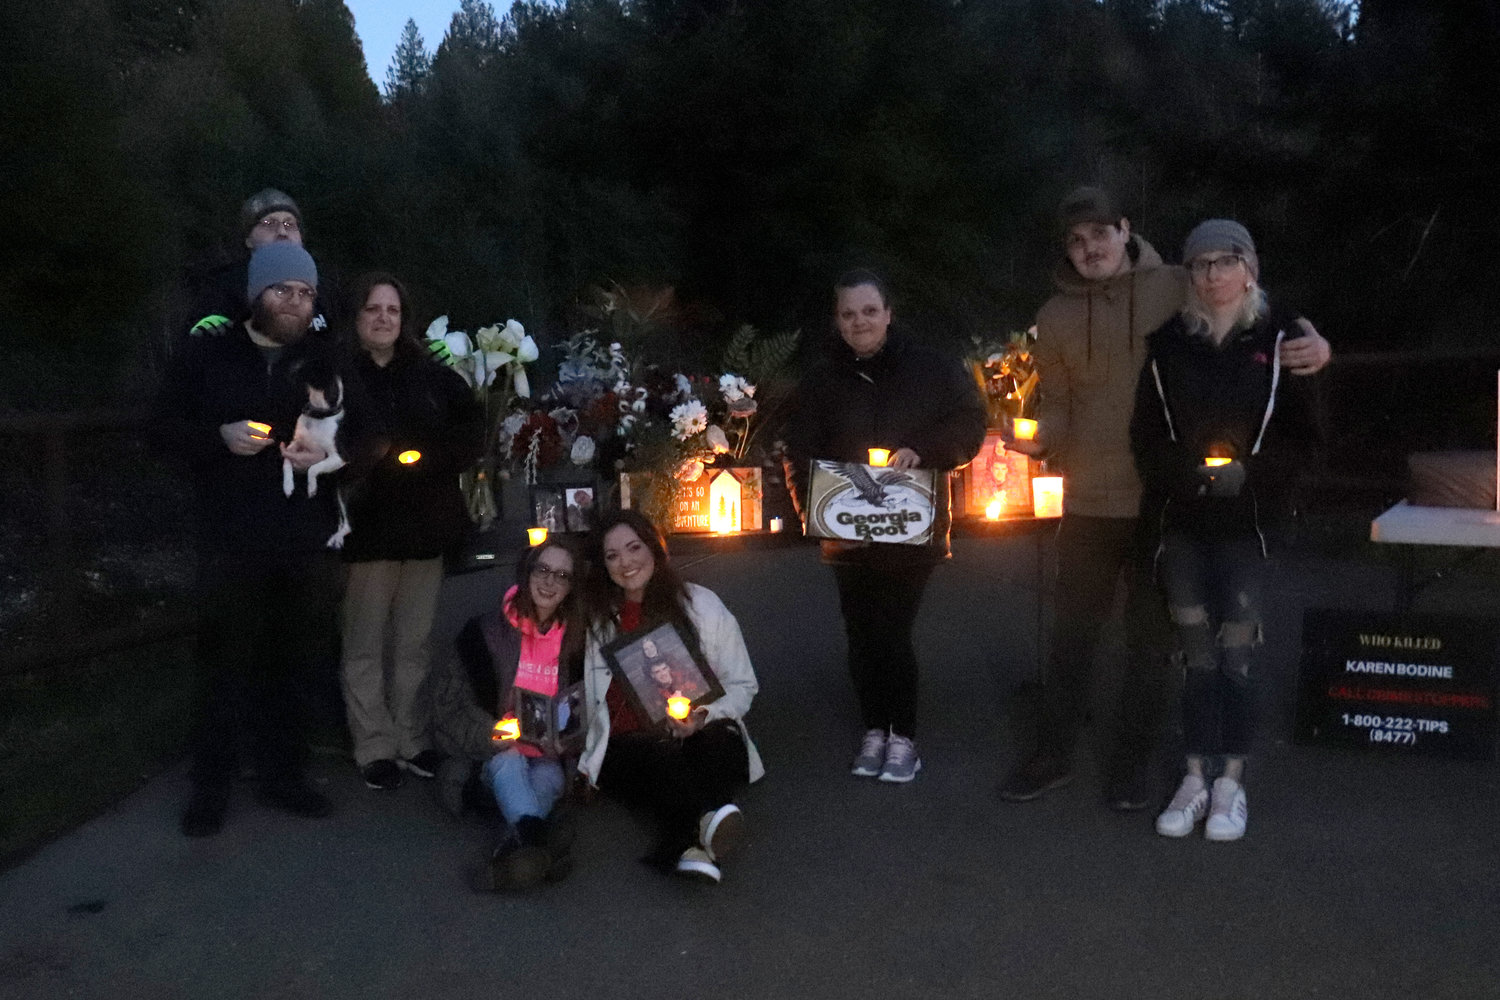 Friends and family of Karlee Bodine’s fiancee, Mitchell Davidson-Link, 33, who died unexpectedly in December, joined in a joint vigil for Davidson-Link and Karen Bodine near Rochester on Saturday. From left, Colton Hammons, Rick Gilbreath, Marci Hammons, Karlee Bodine, Taylor Bodine, Colleen Eshom, Kenny Eubanks and Erika Fagergren.